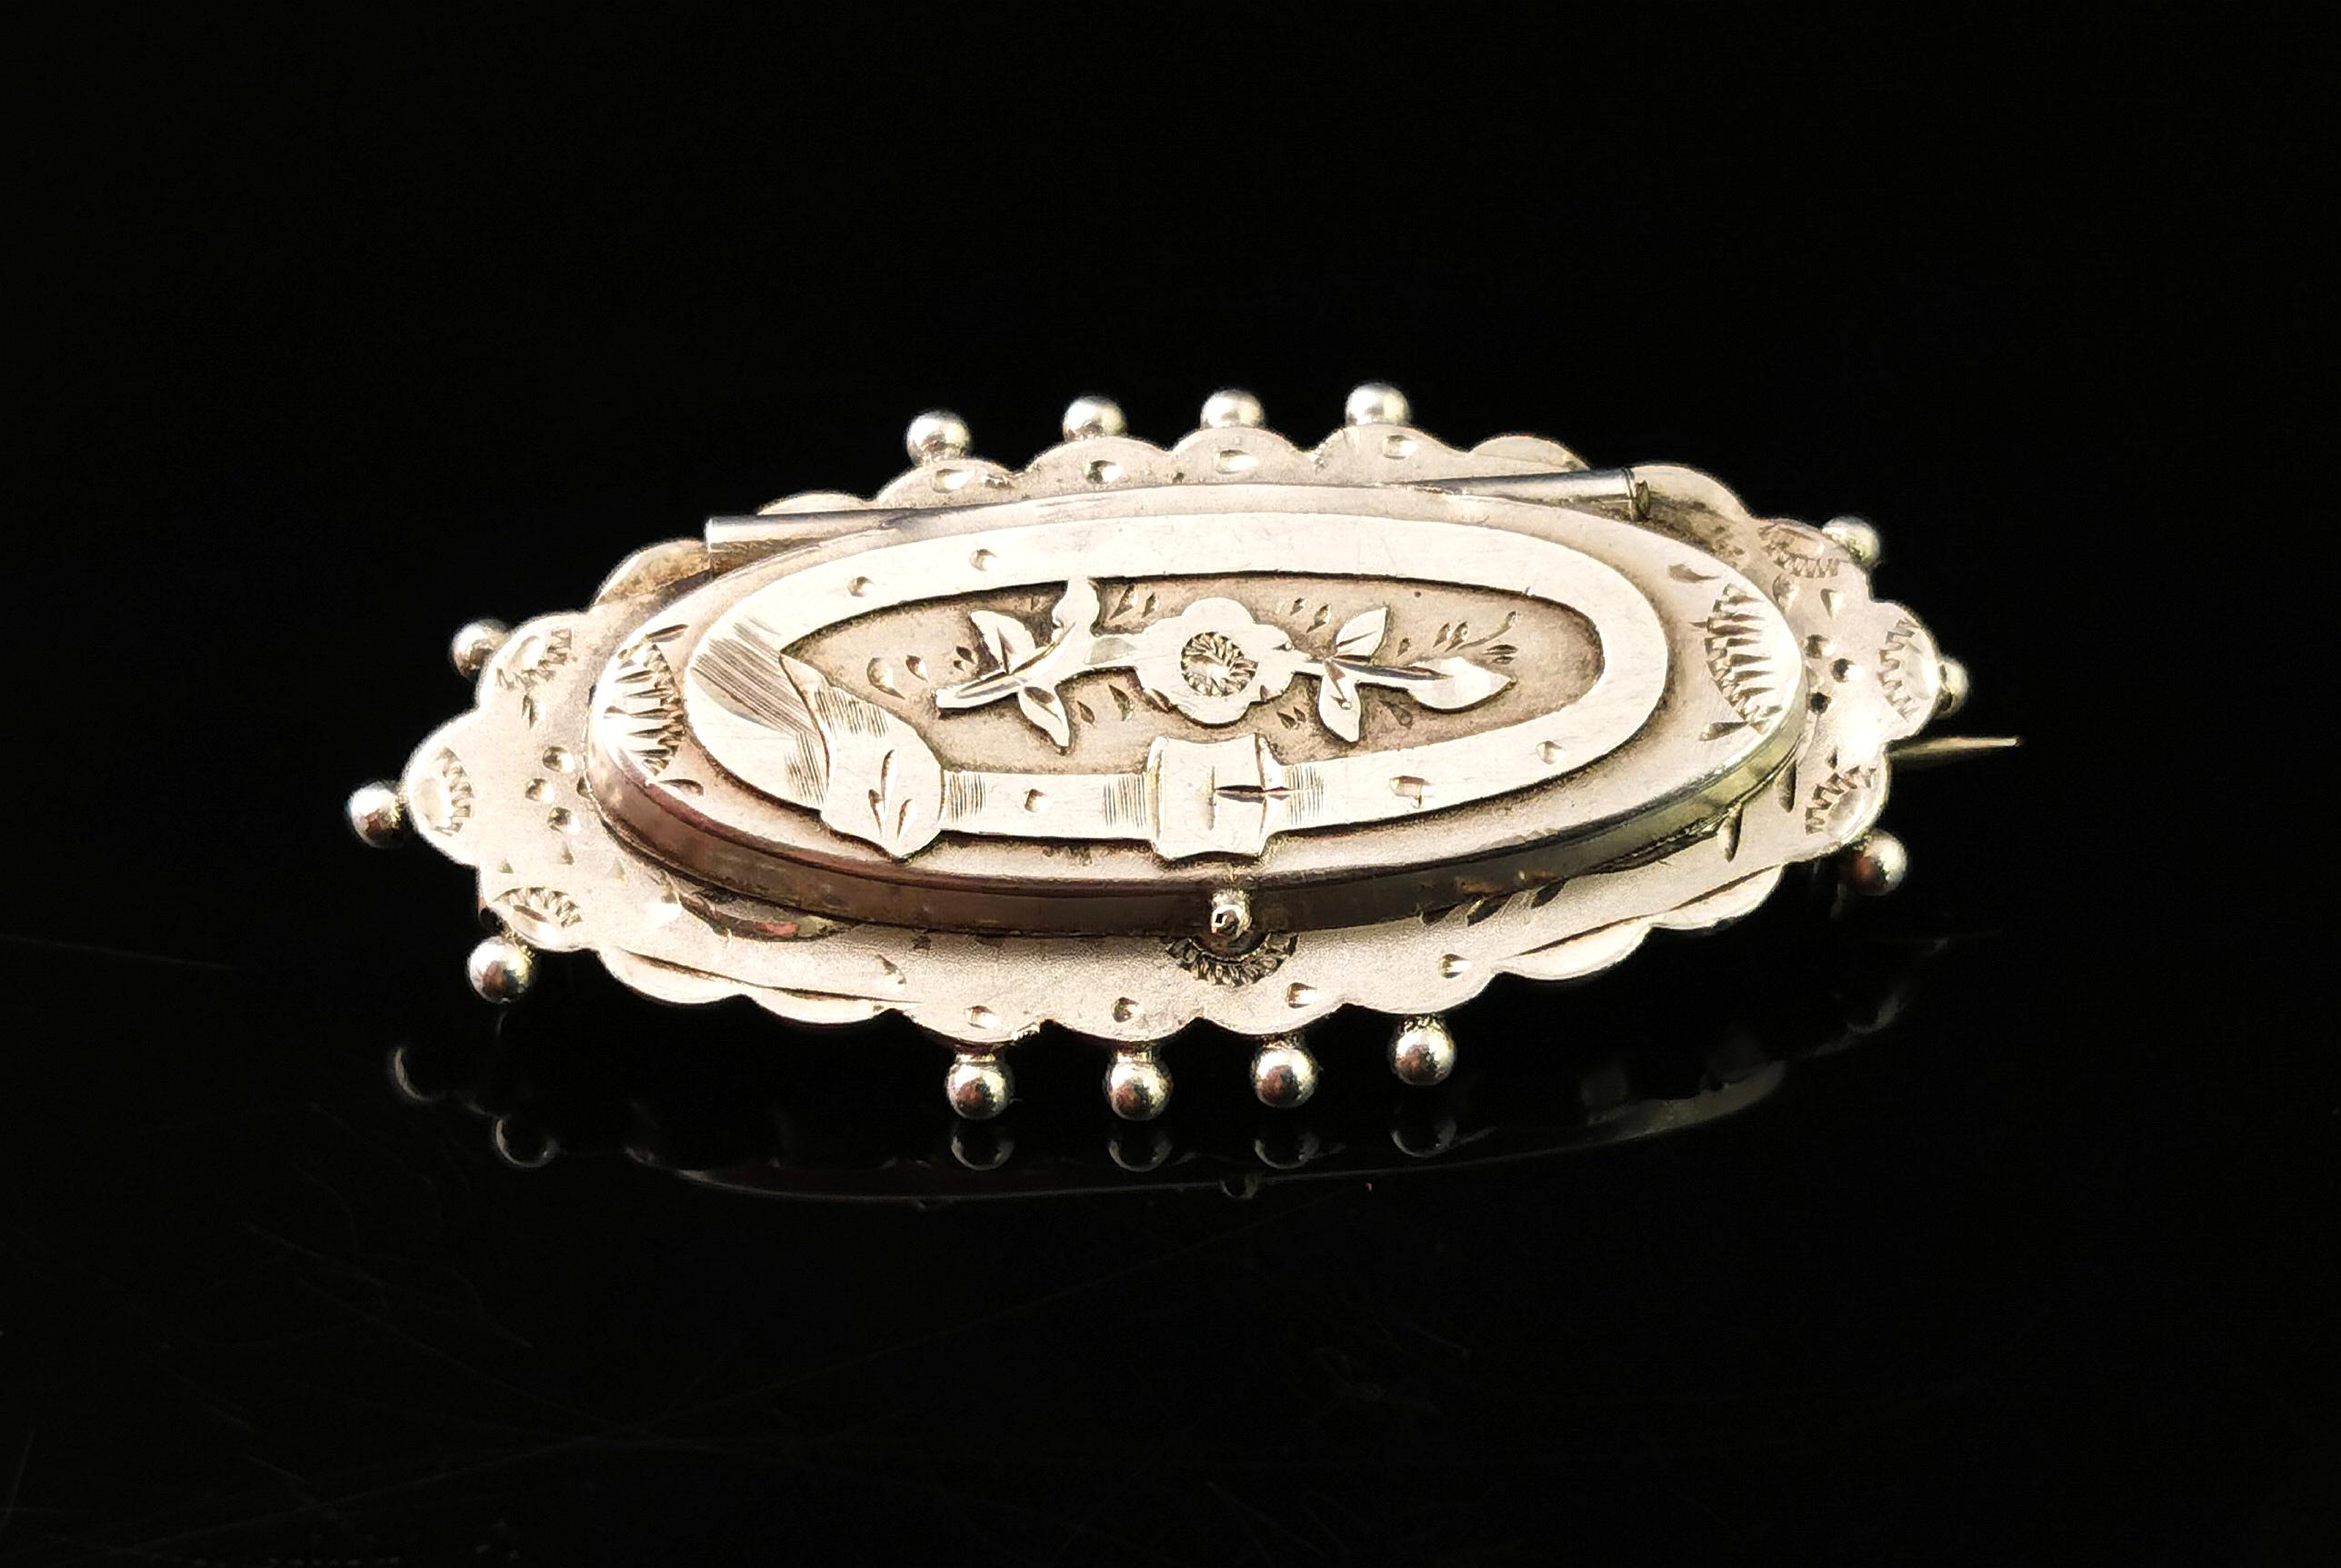 A fine and rare antique silver locket brooch.

This fantastic piece is engraved in the aesthetic manner with foliage and a belt and buckle, the belt / buckle symbolises holding one close.

The top of the brooch opens up revealing a little concealed